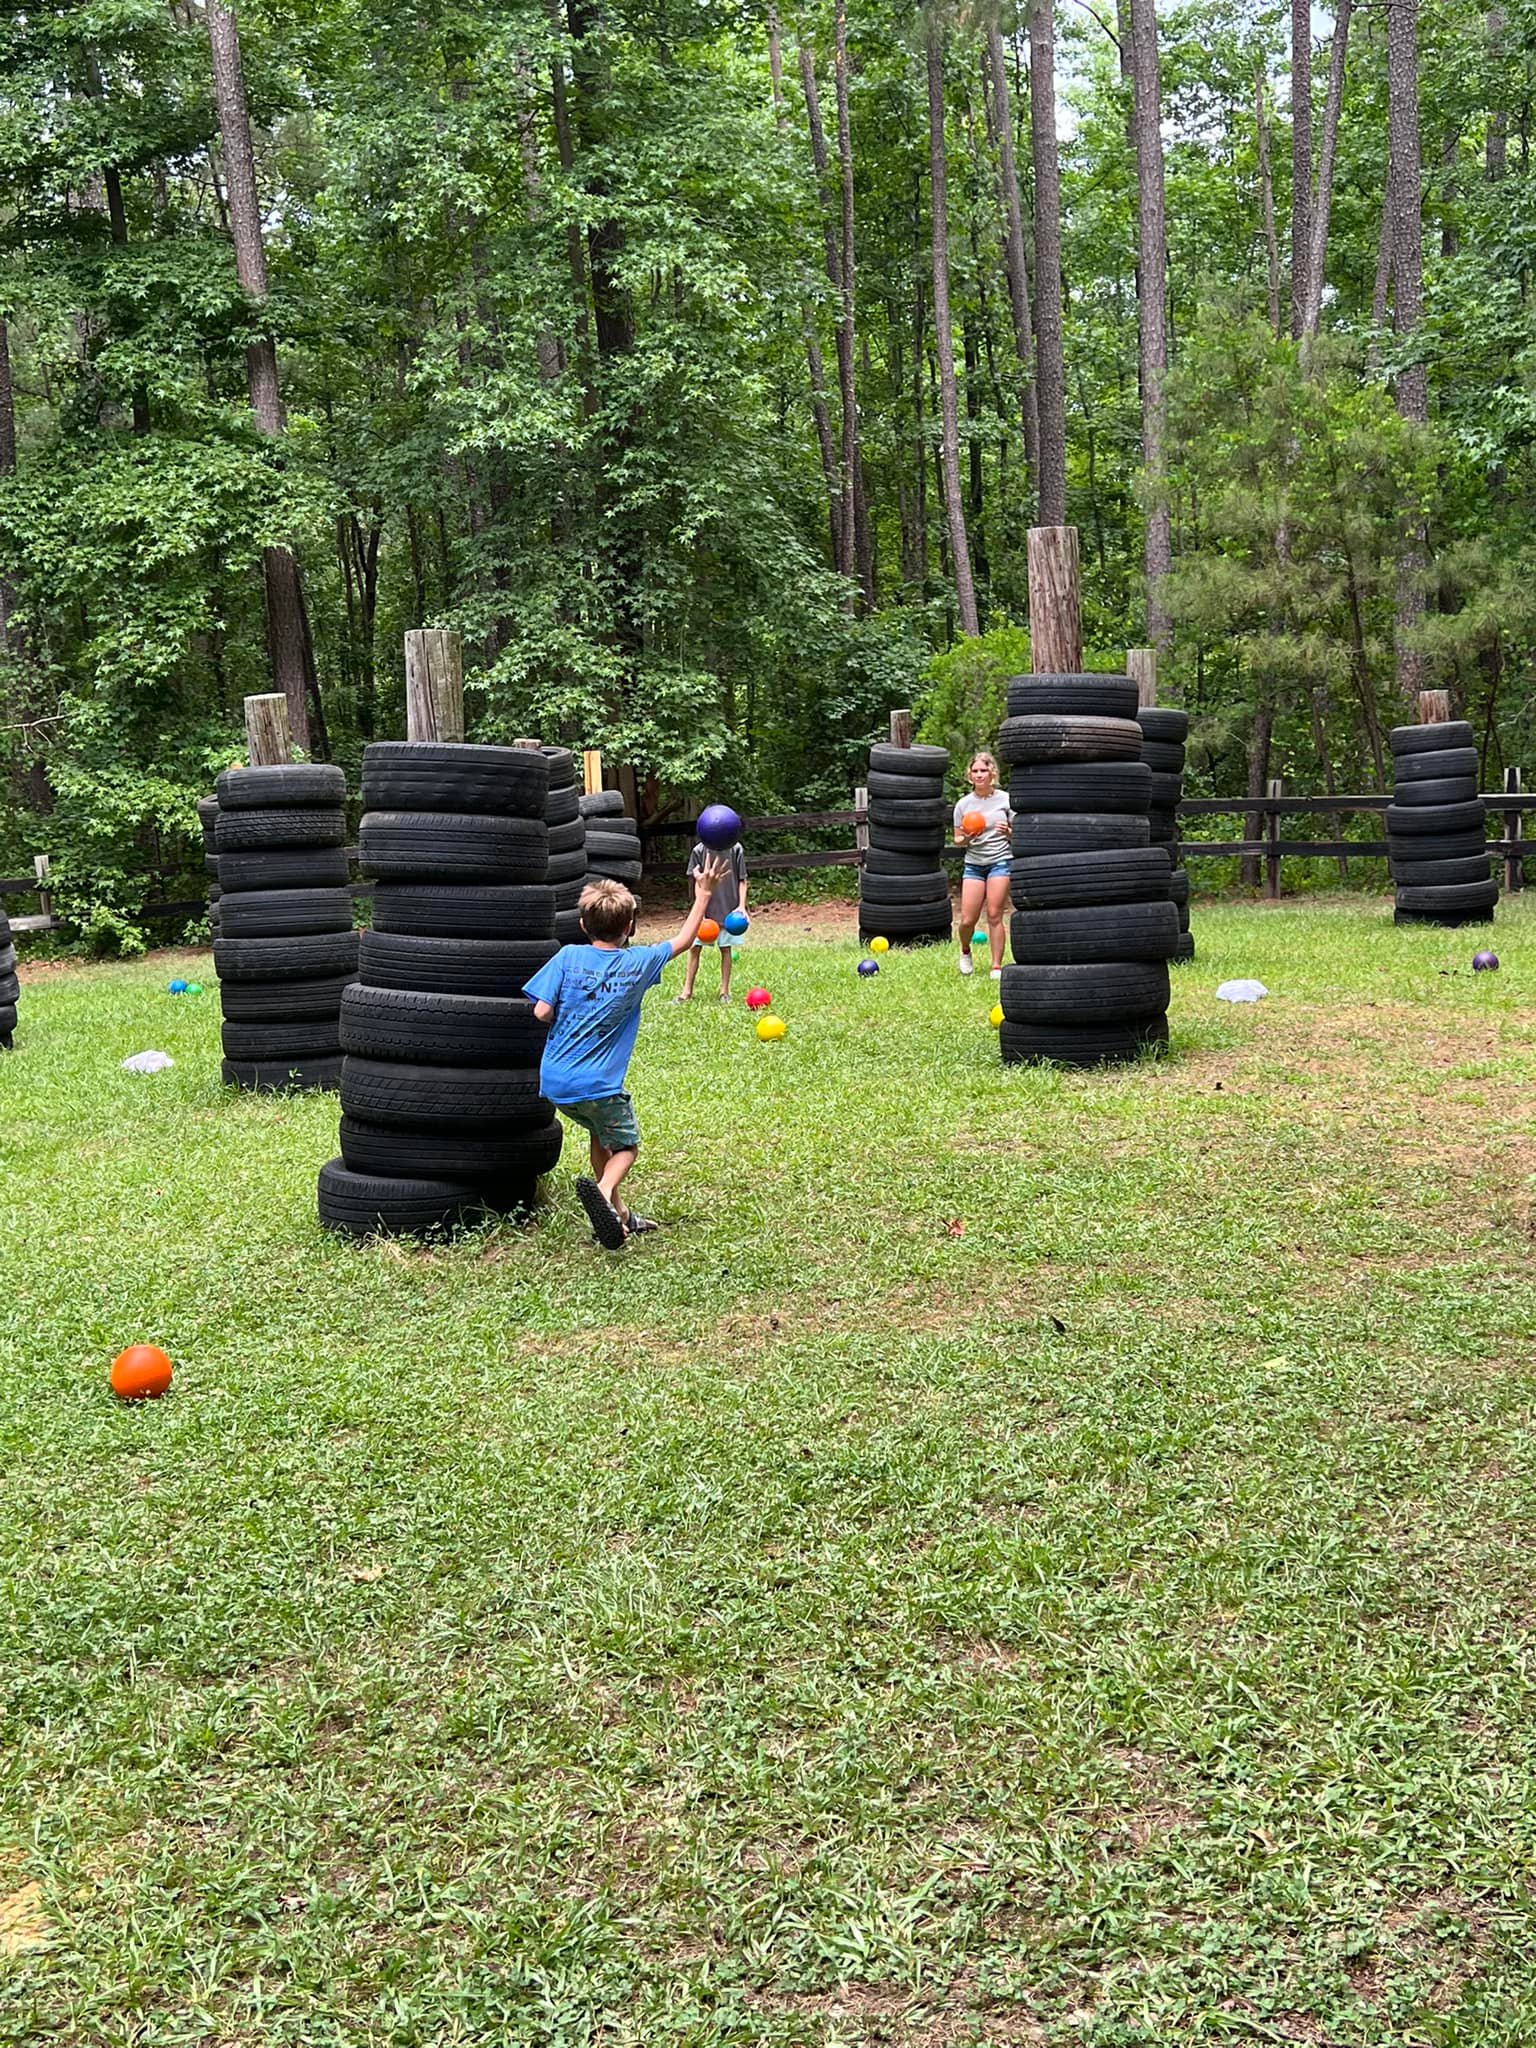 An arena selected for its deep wooded coverage, complete with tire stacked barriers to give everyone a fighting chance.